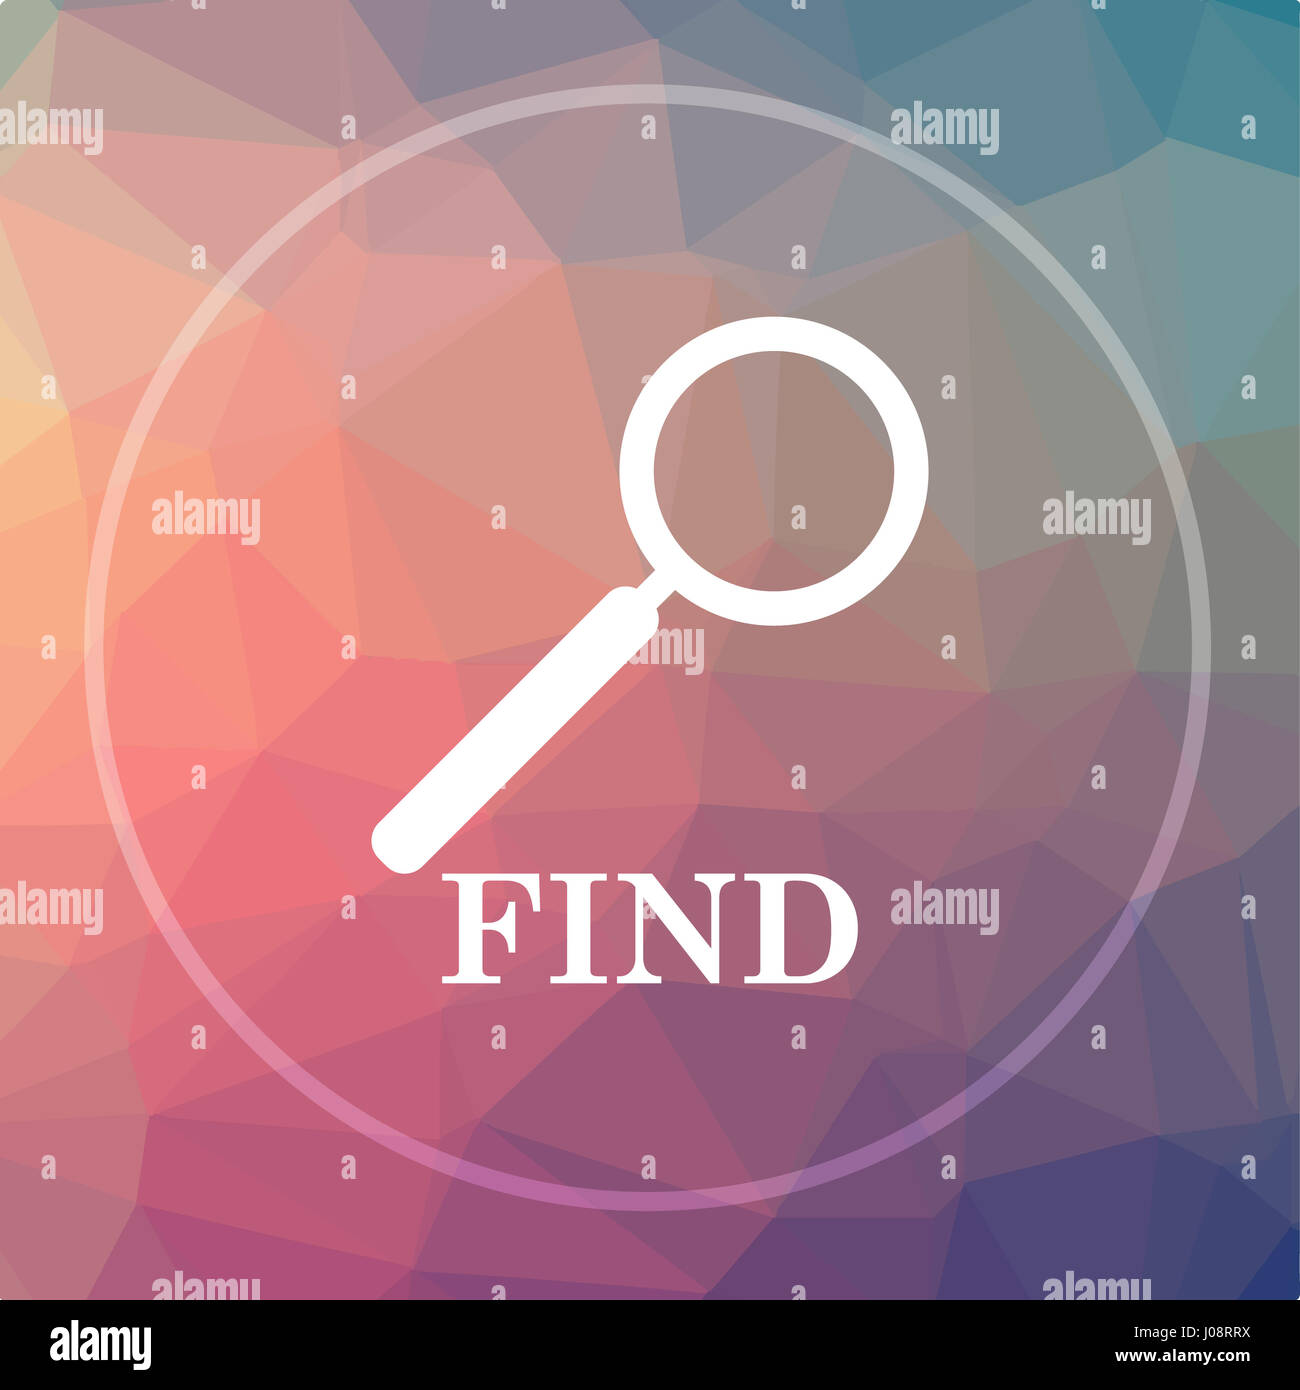 Find icon. Find website button on low poly background. Stock Photo